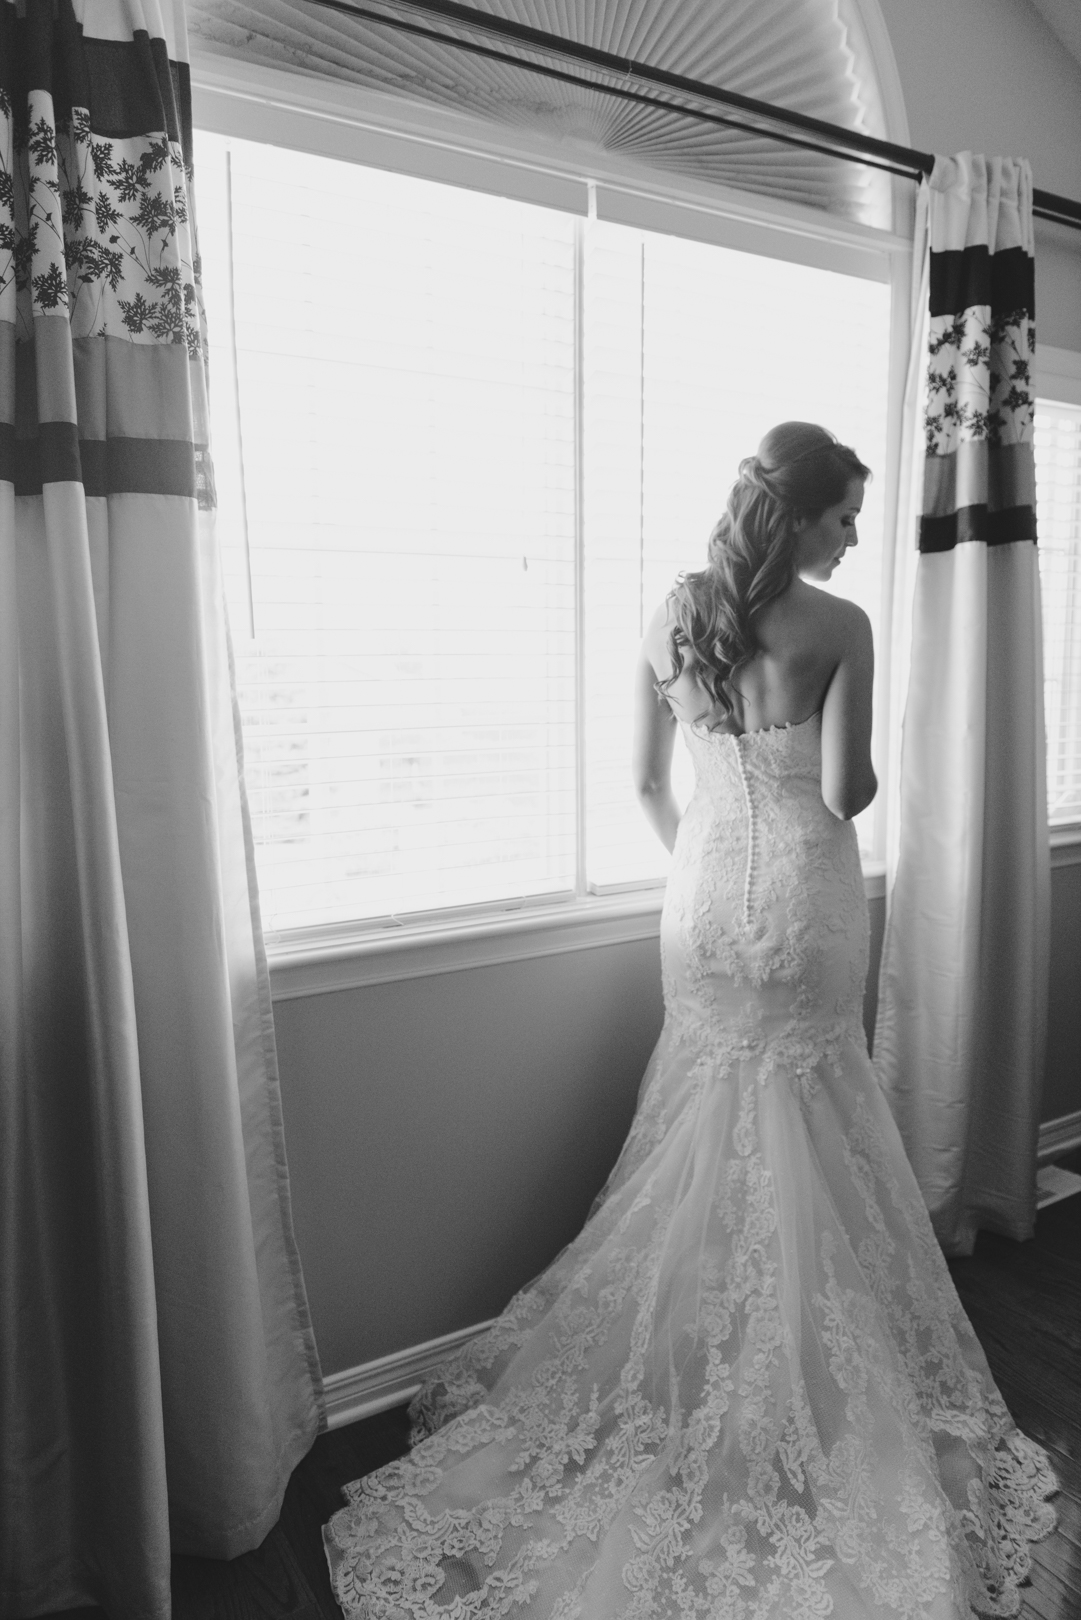 Silhouette of bride in the window getting ready